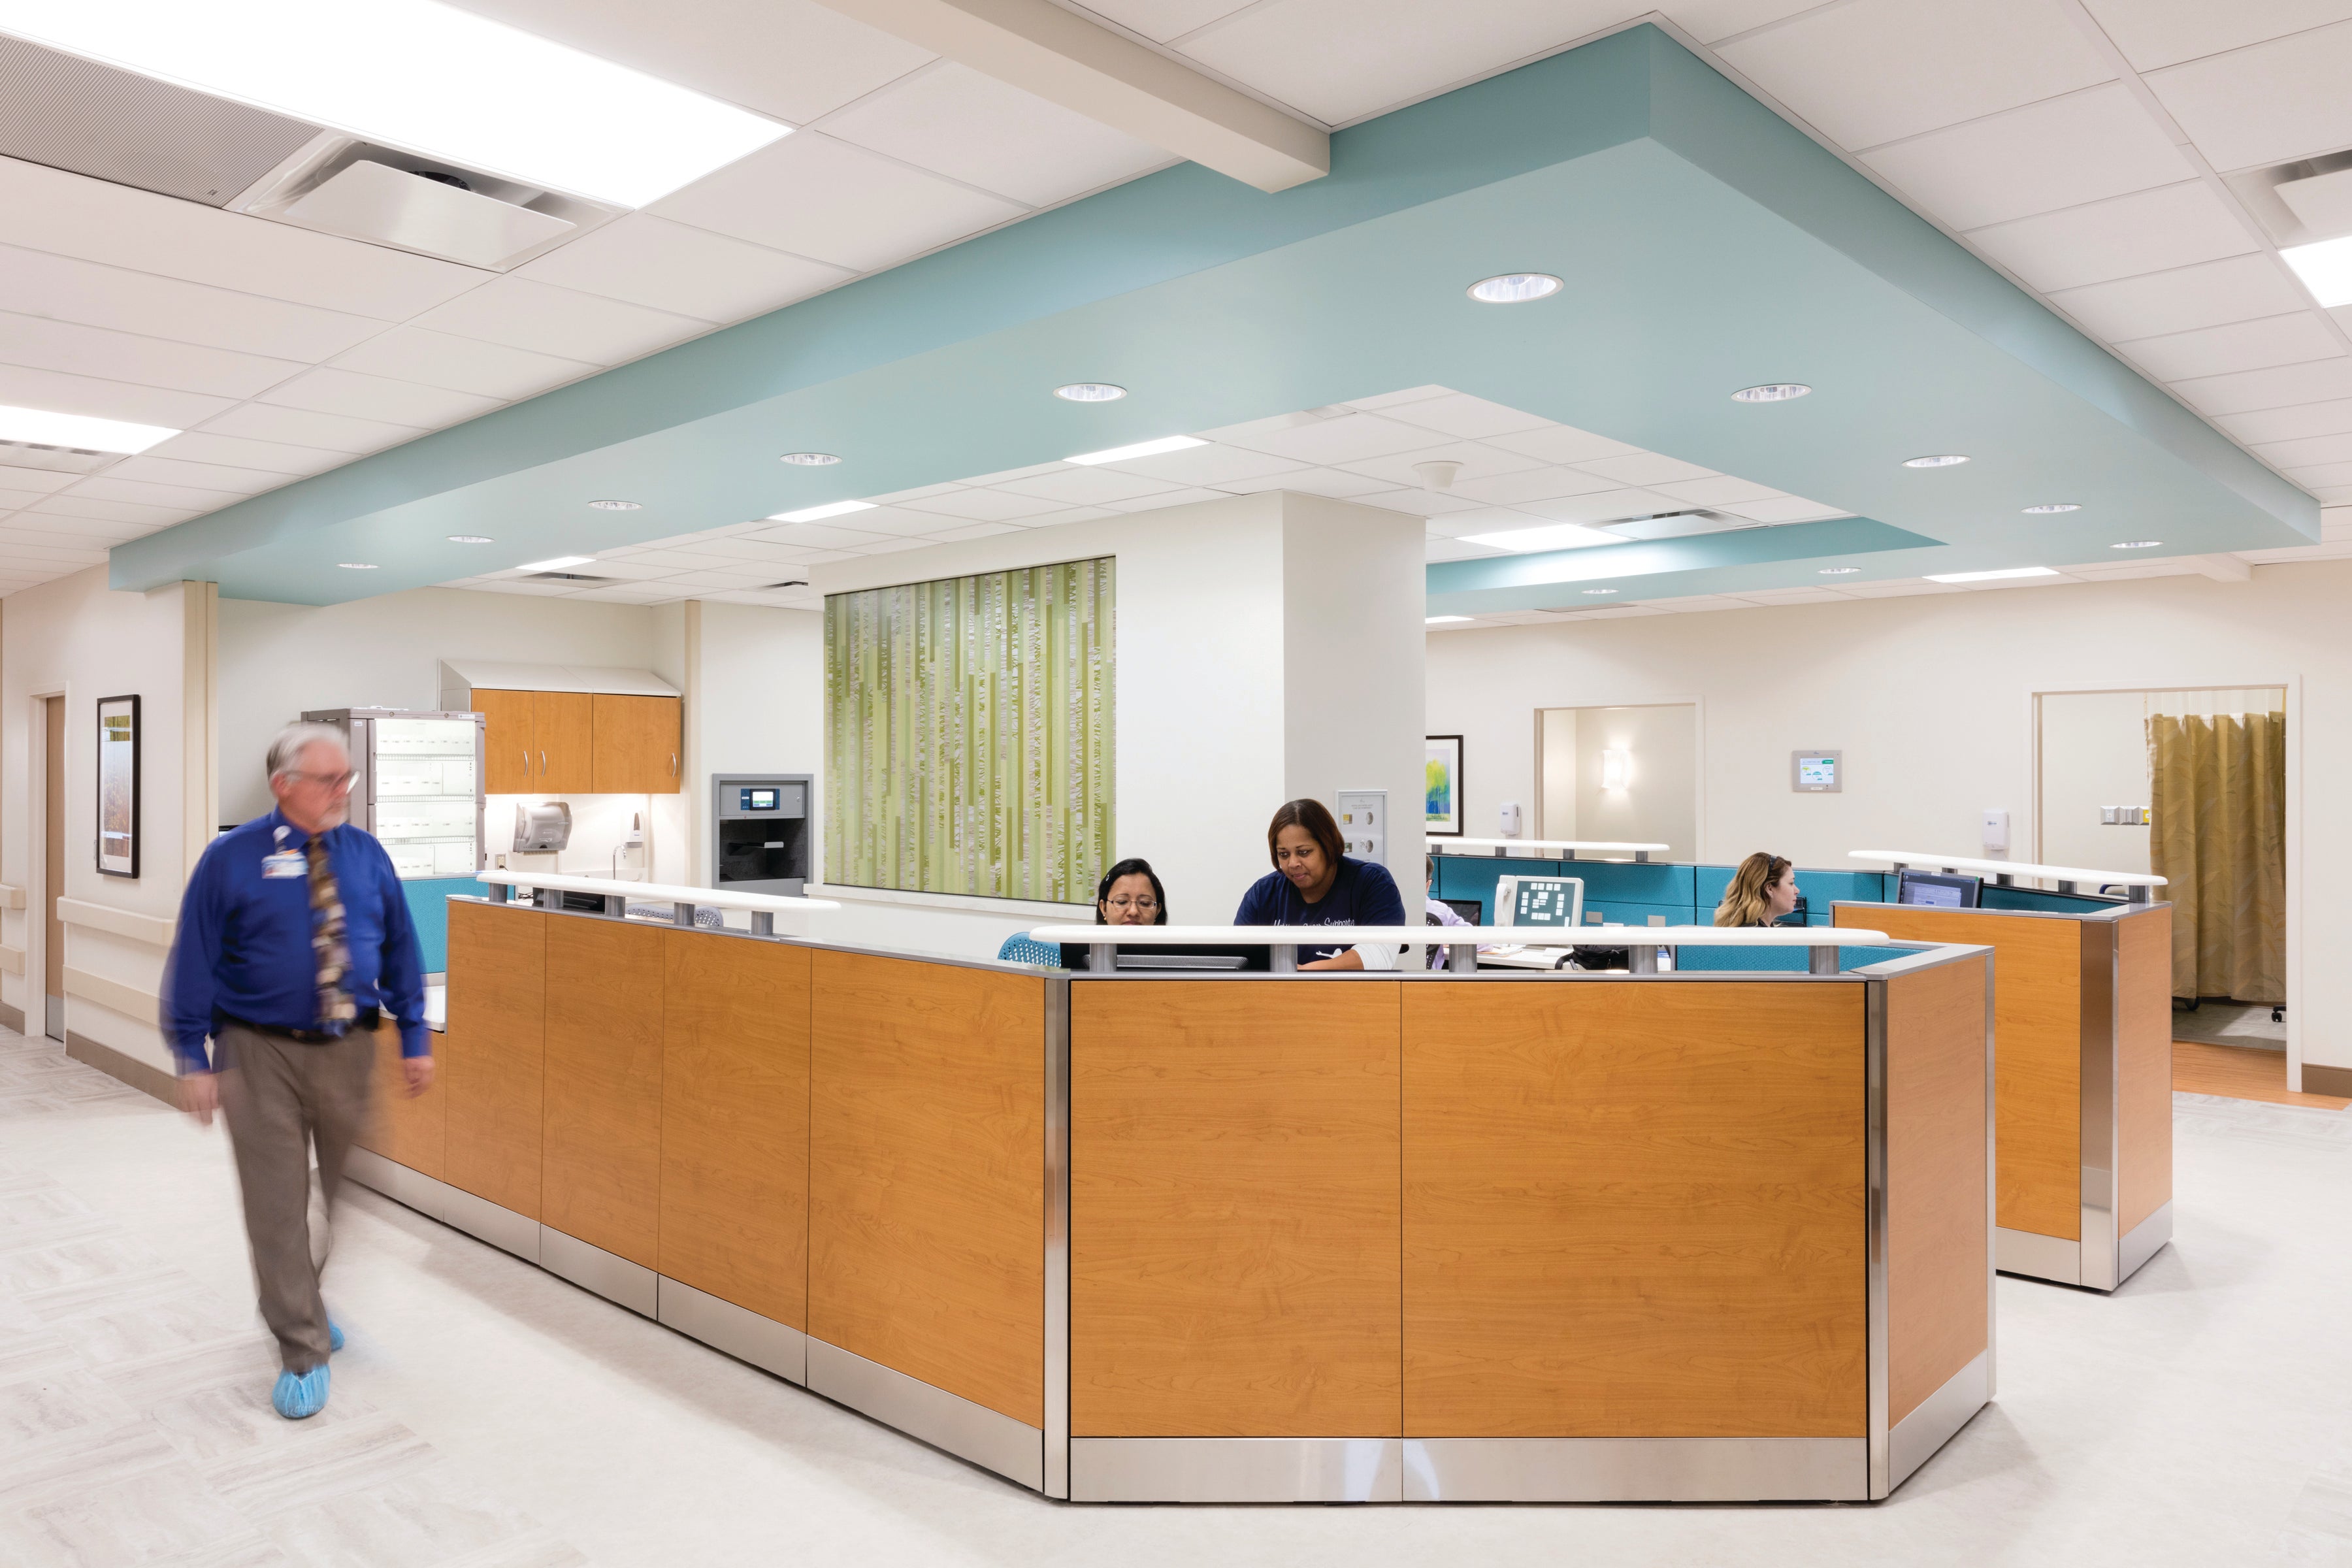 Post-anesthesia care unit bays at CHI St. Luke’s Health–Springwoods Village